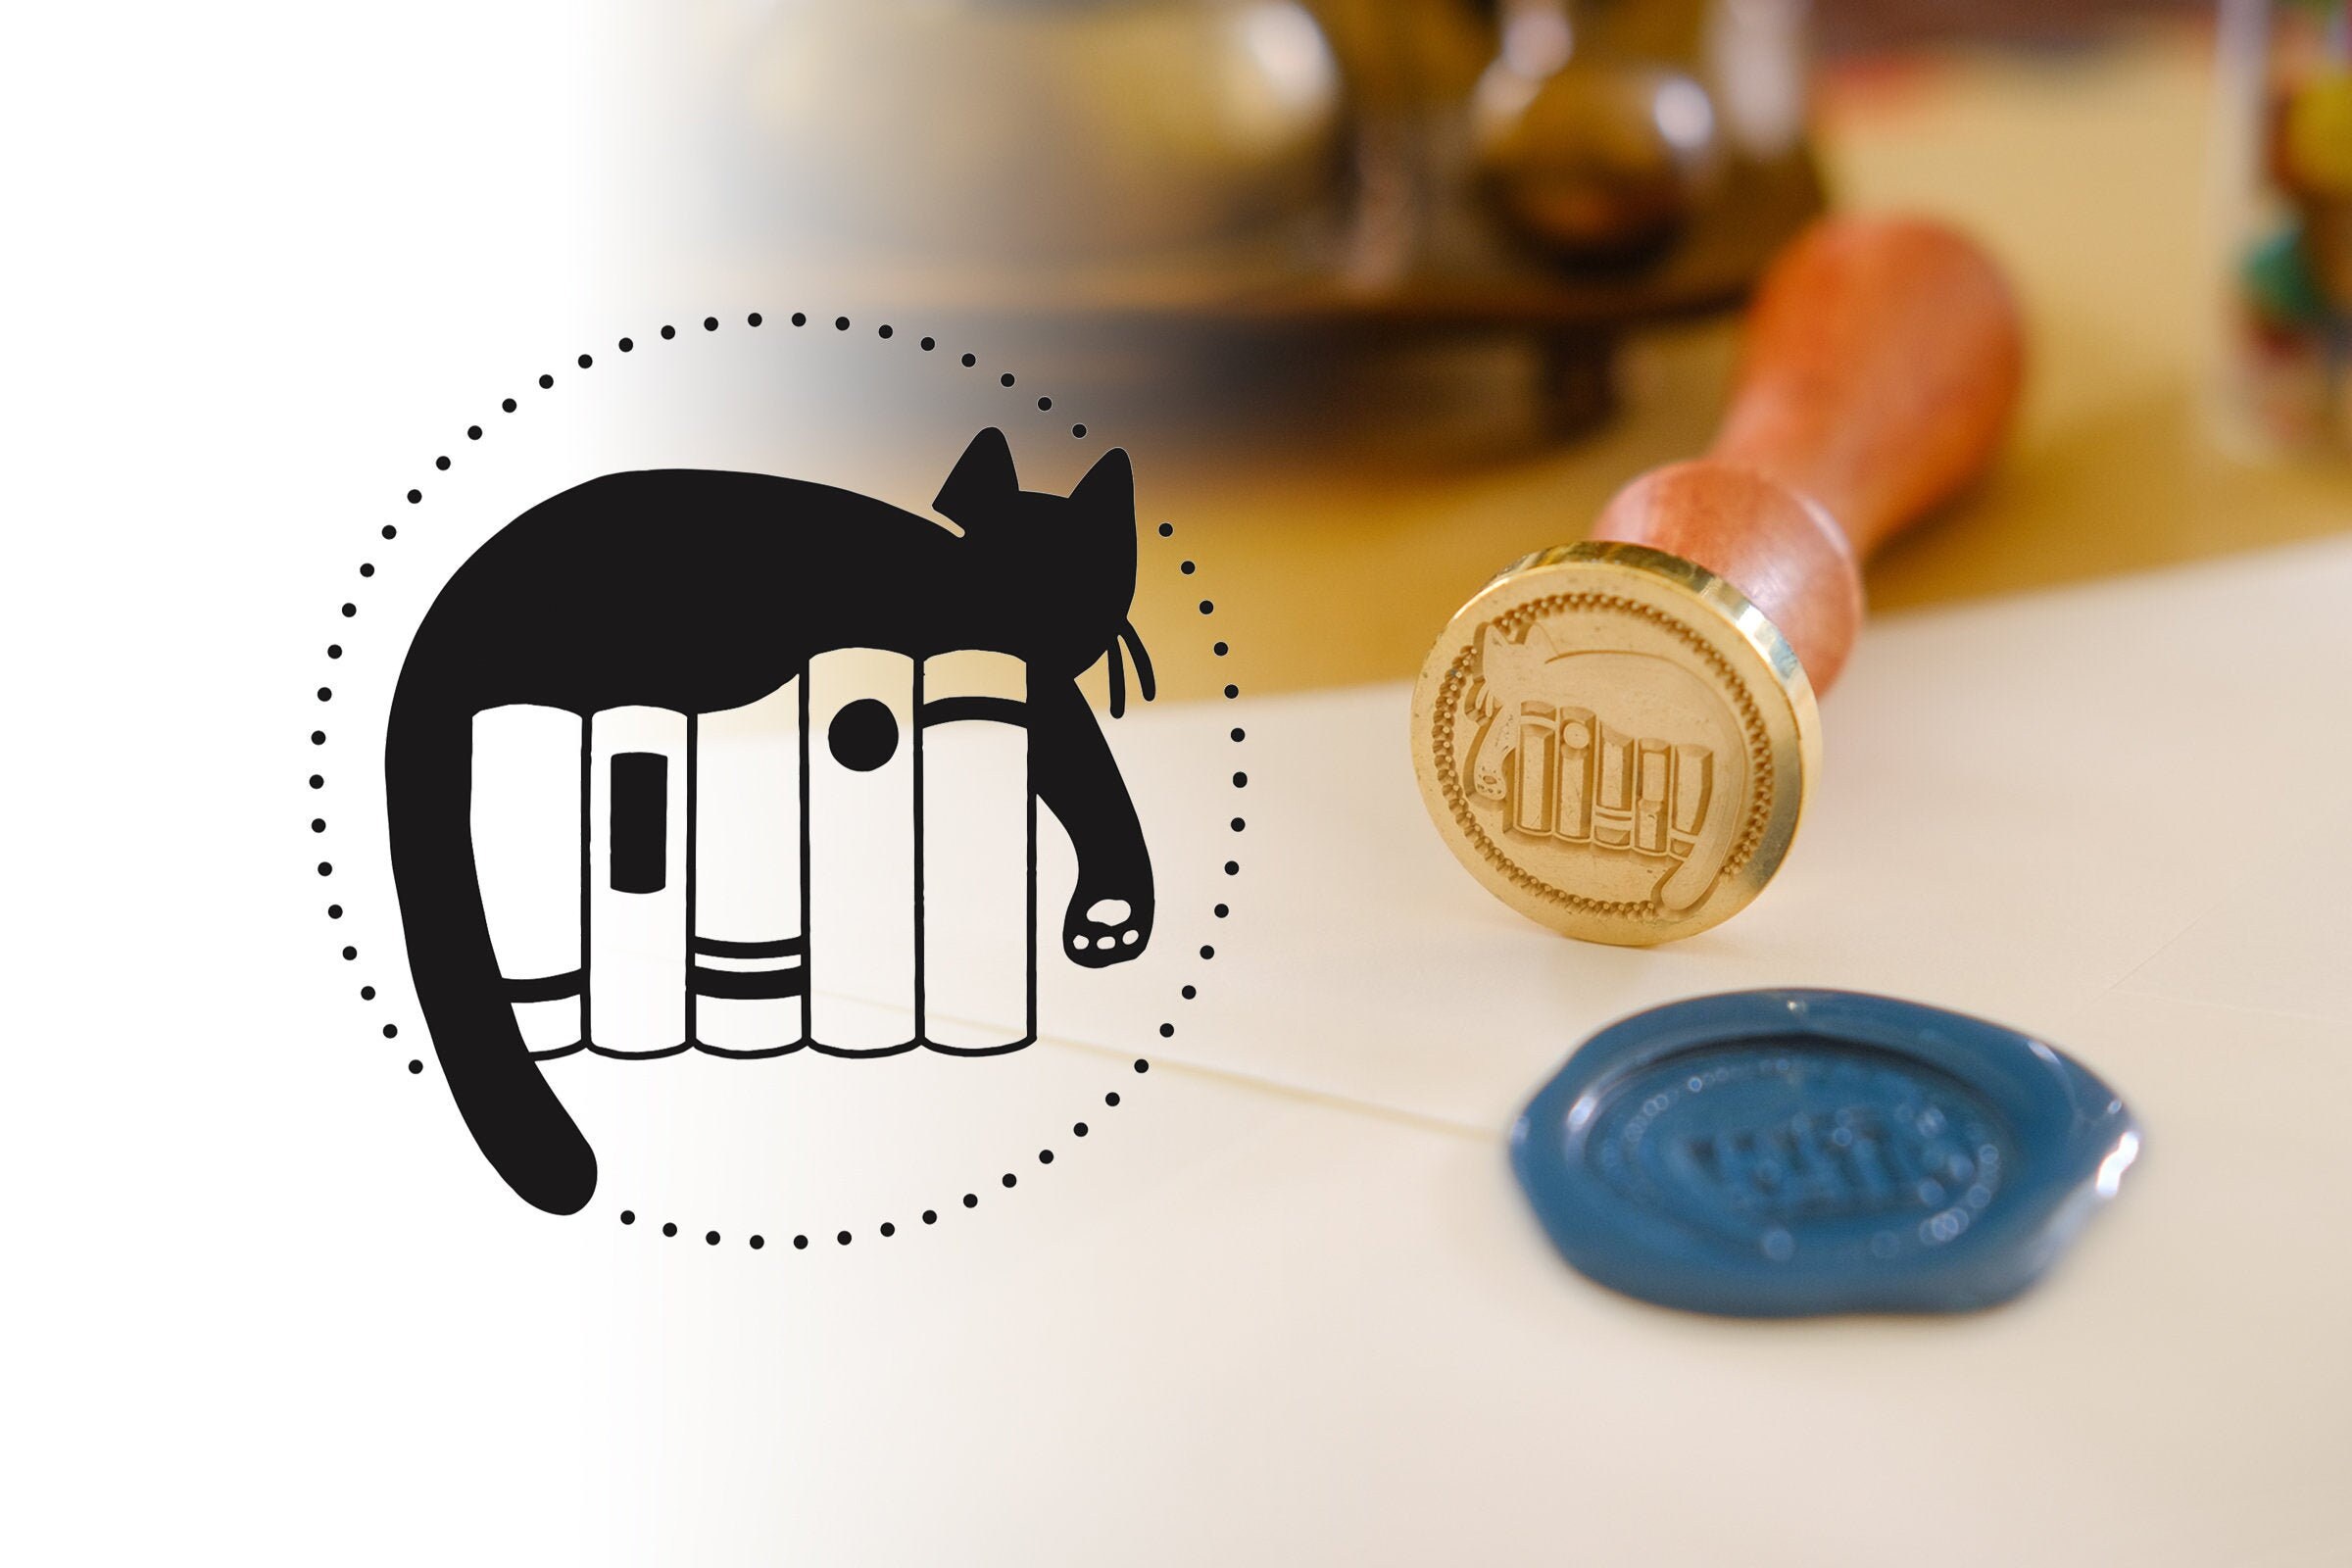 Japanese Stationery Letters Stay home Sealing Wax Stamp Vintage style Stationery Love Cat lover Craft Writing